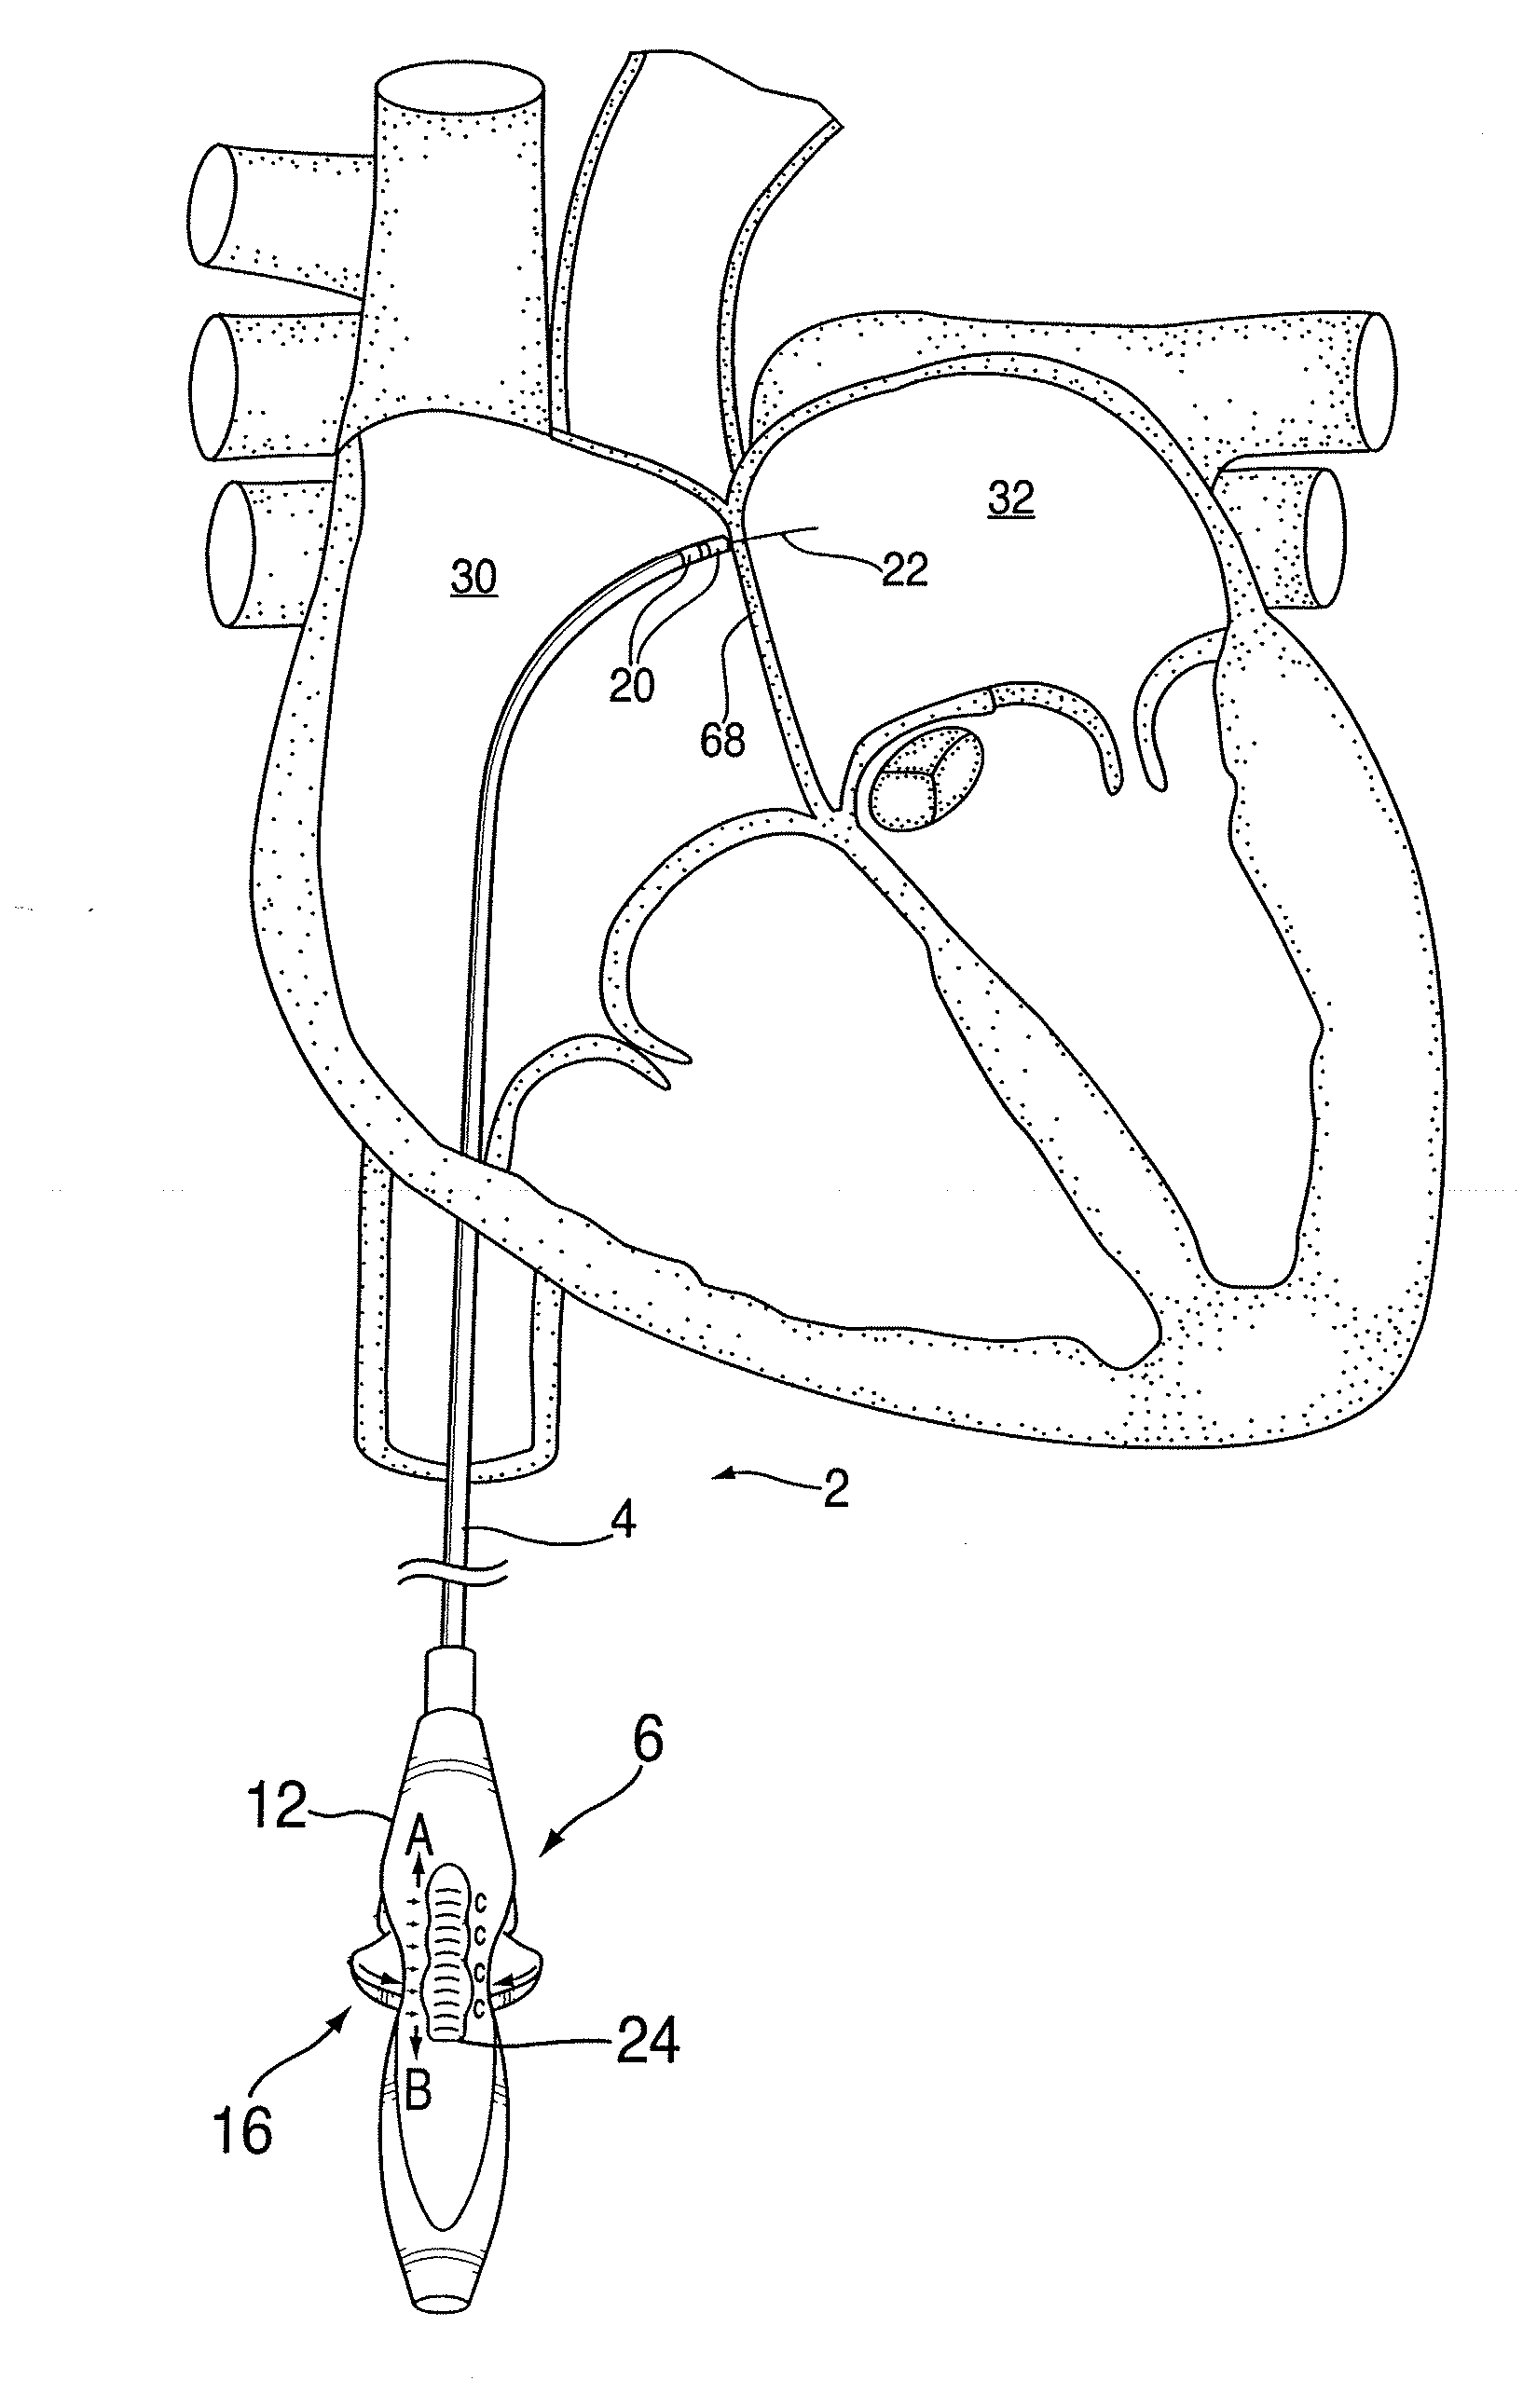 Apparatus for safe performance of transseptal technique and placement and positioning of an ablation catheter